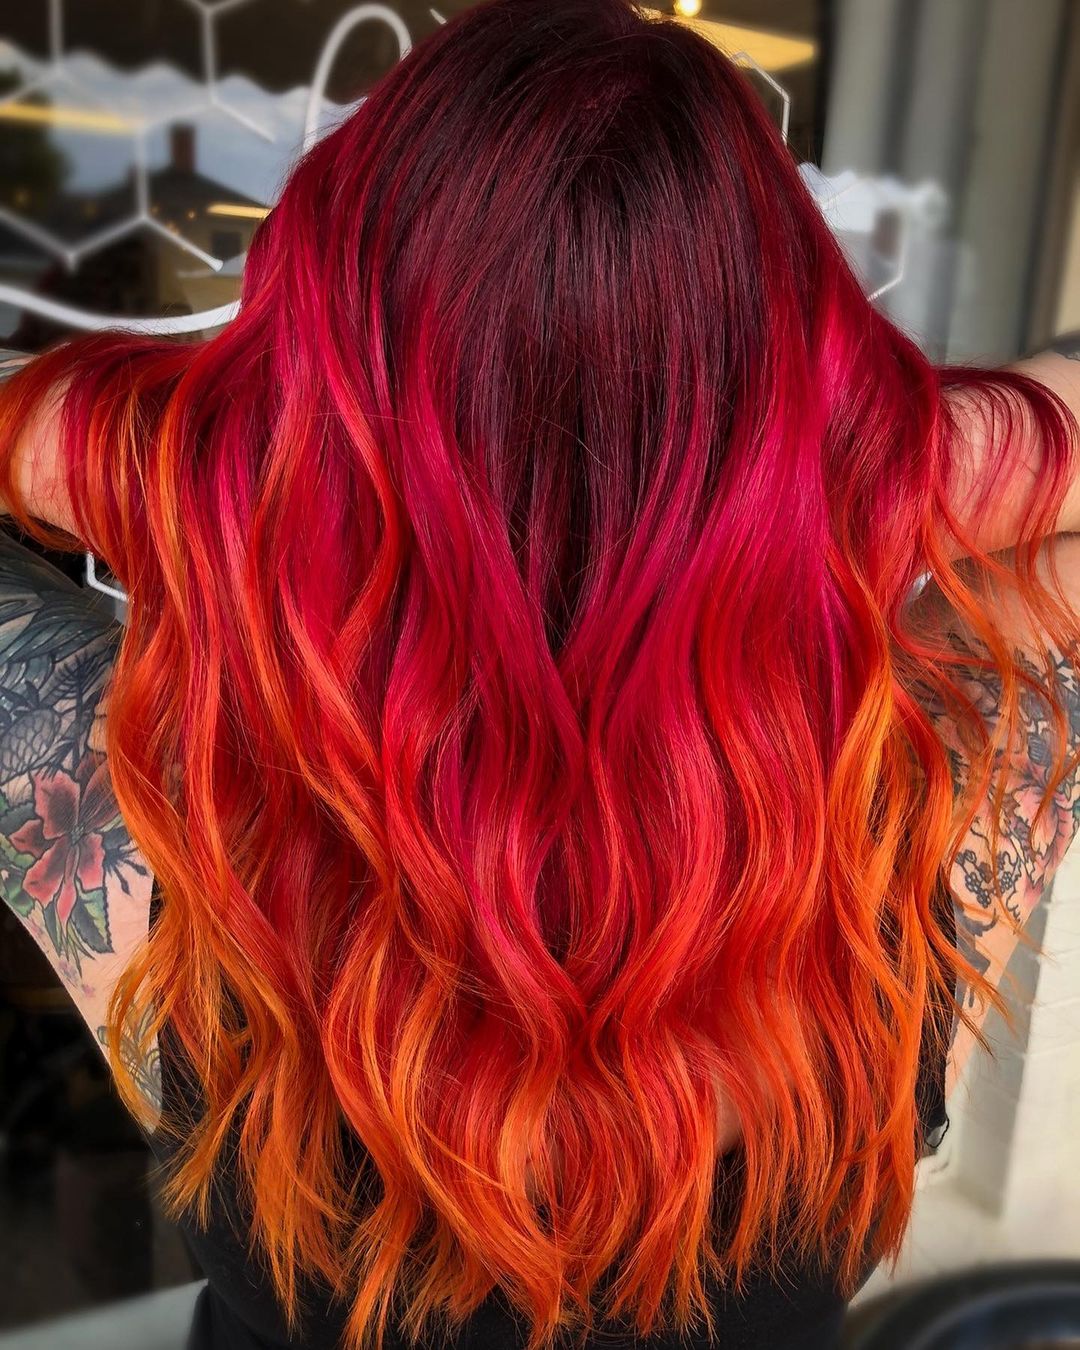 Red Galaxy Colors on Long Wavy Hair